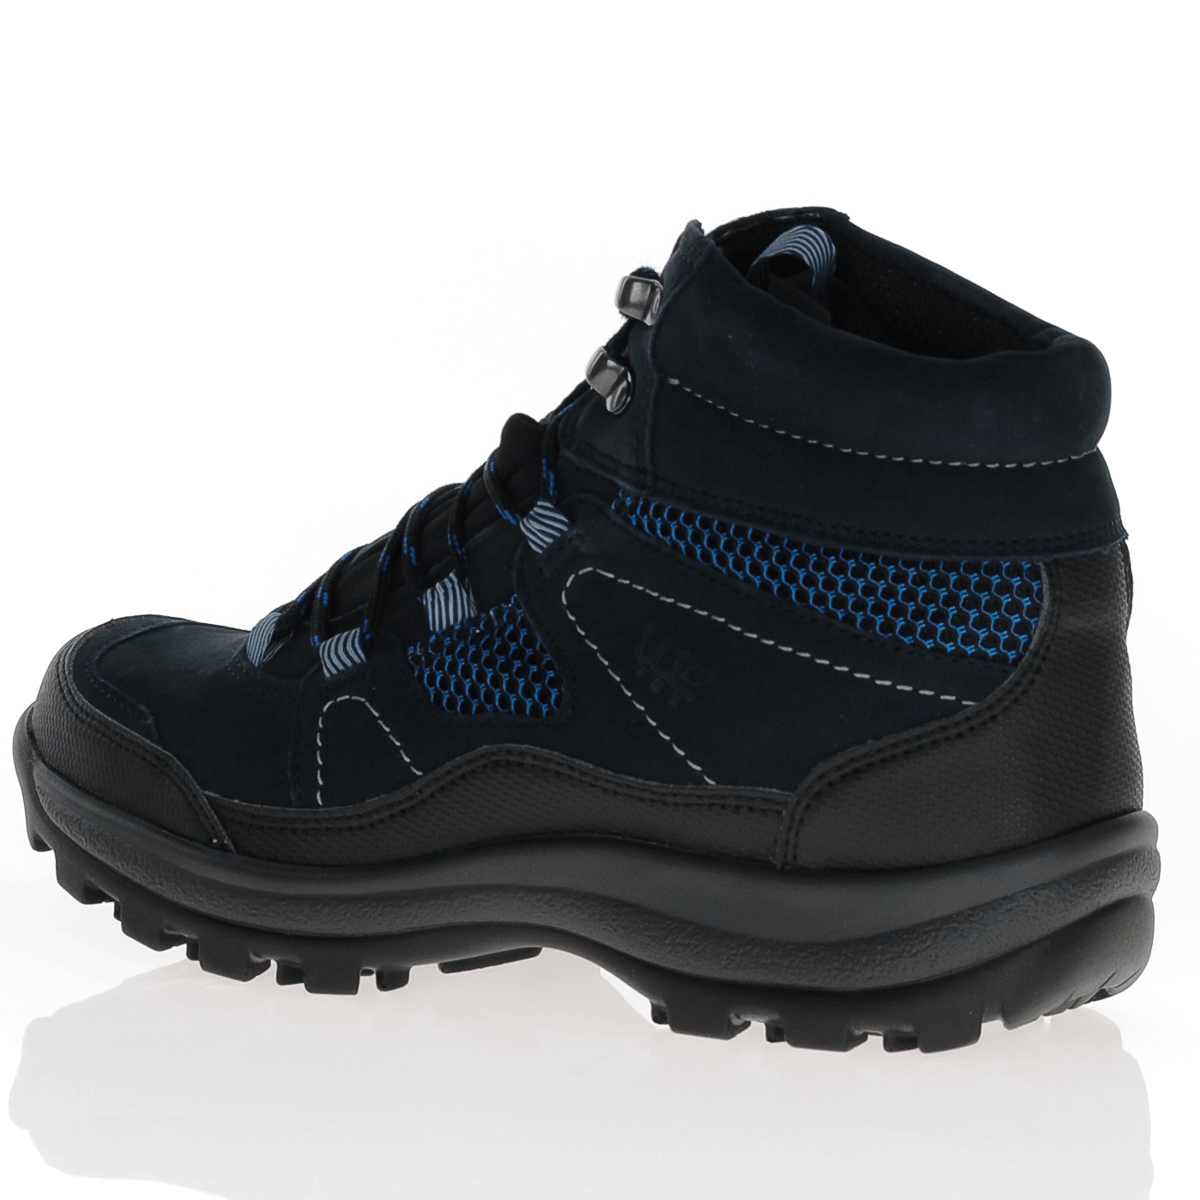 Waldlaufer - Waterproof Lace Up Boots Navy/Black - 471974, The Shoe Horn